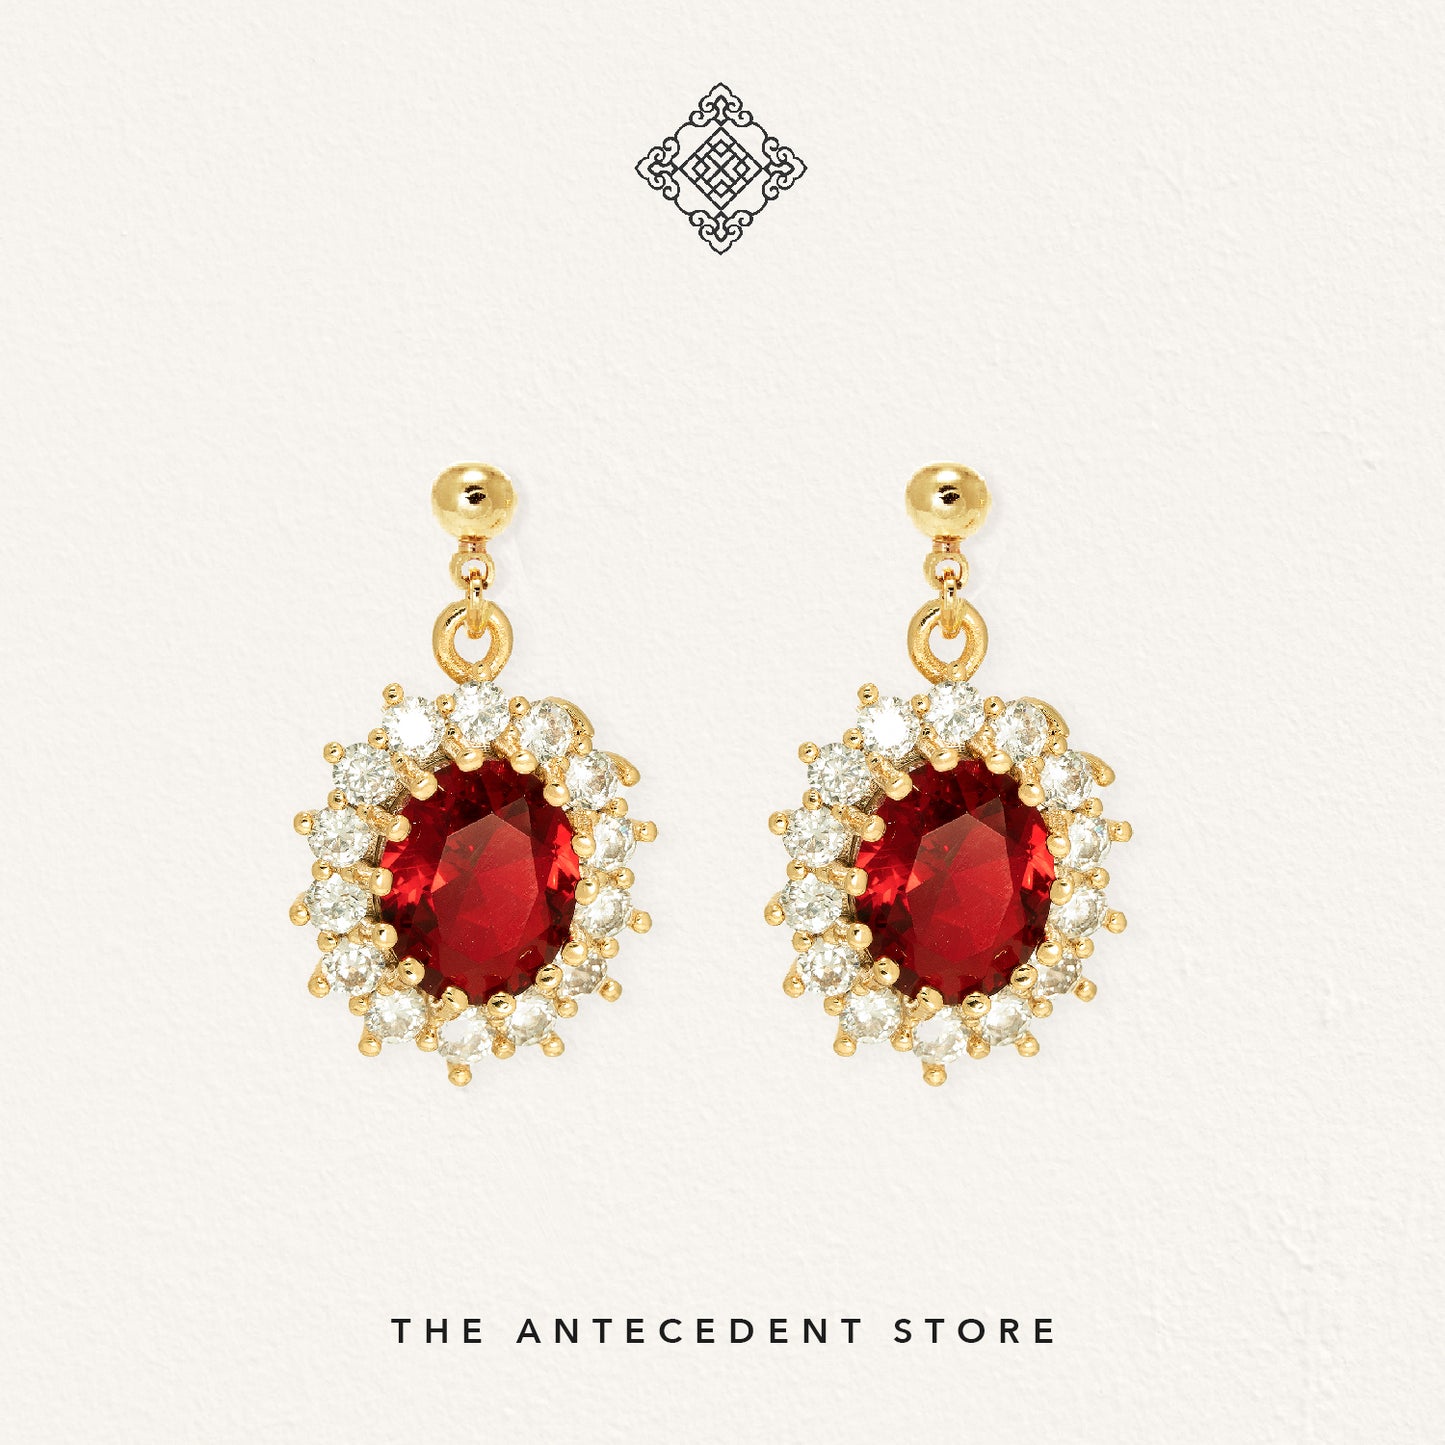 Red Ruby Earrings with Cubic Zirconia Crystals - 14K Real Gold Plated Jewelry